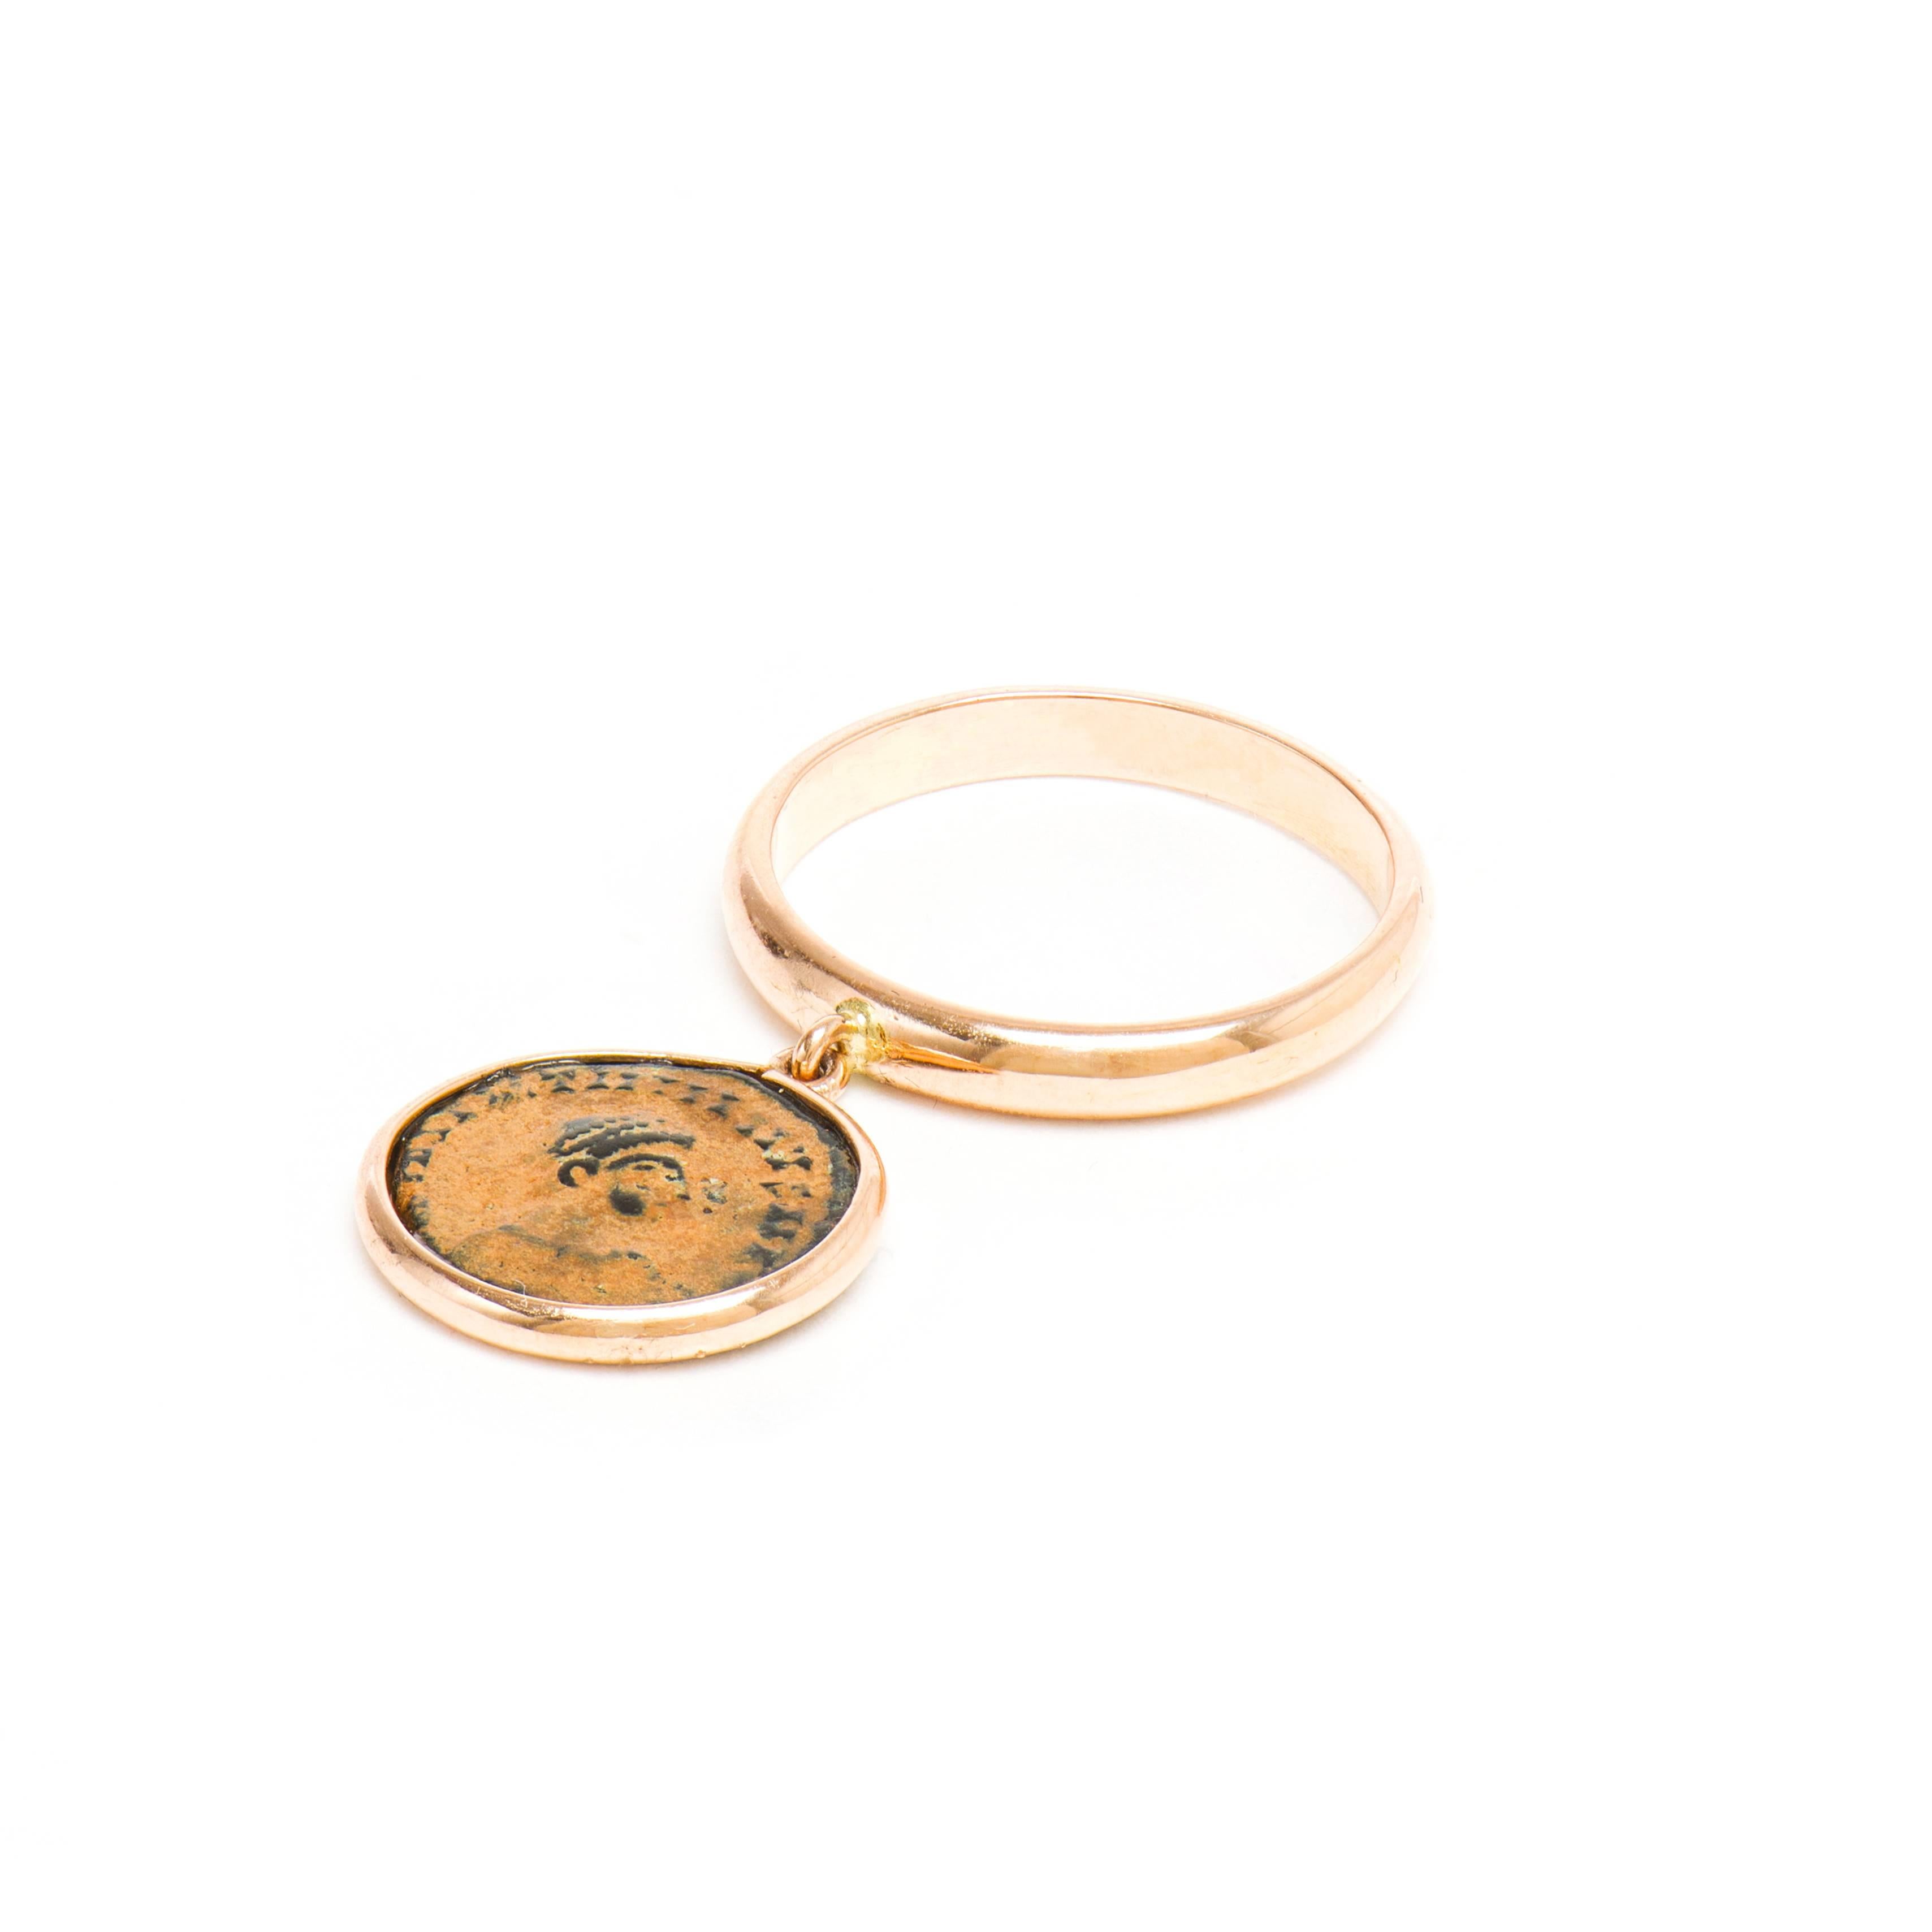 This DUBINI coin ring from the 'Empires' collection features an authentic Roman bronze coin set in 18K rose gold.

* Due to the unique process of hand carving coins in ancient times, there may be a few stylistic differences from the image